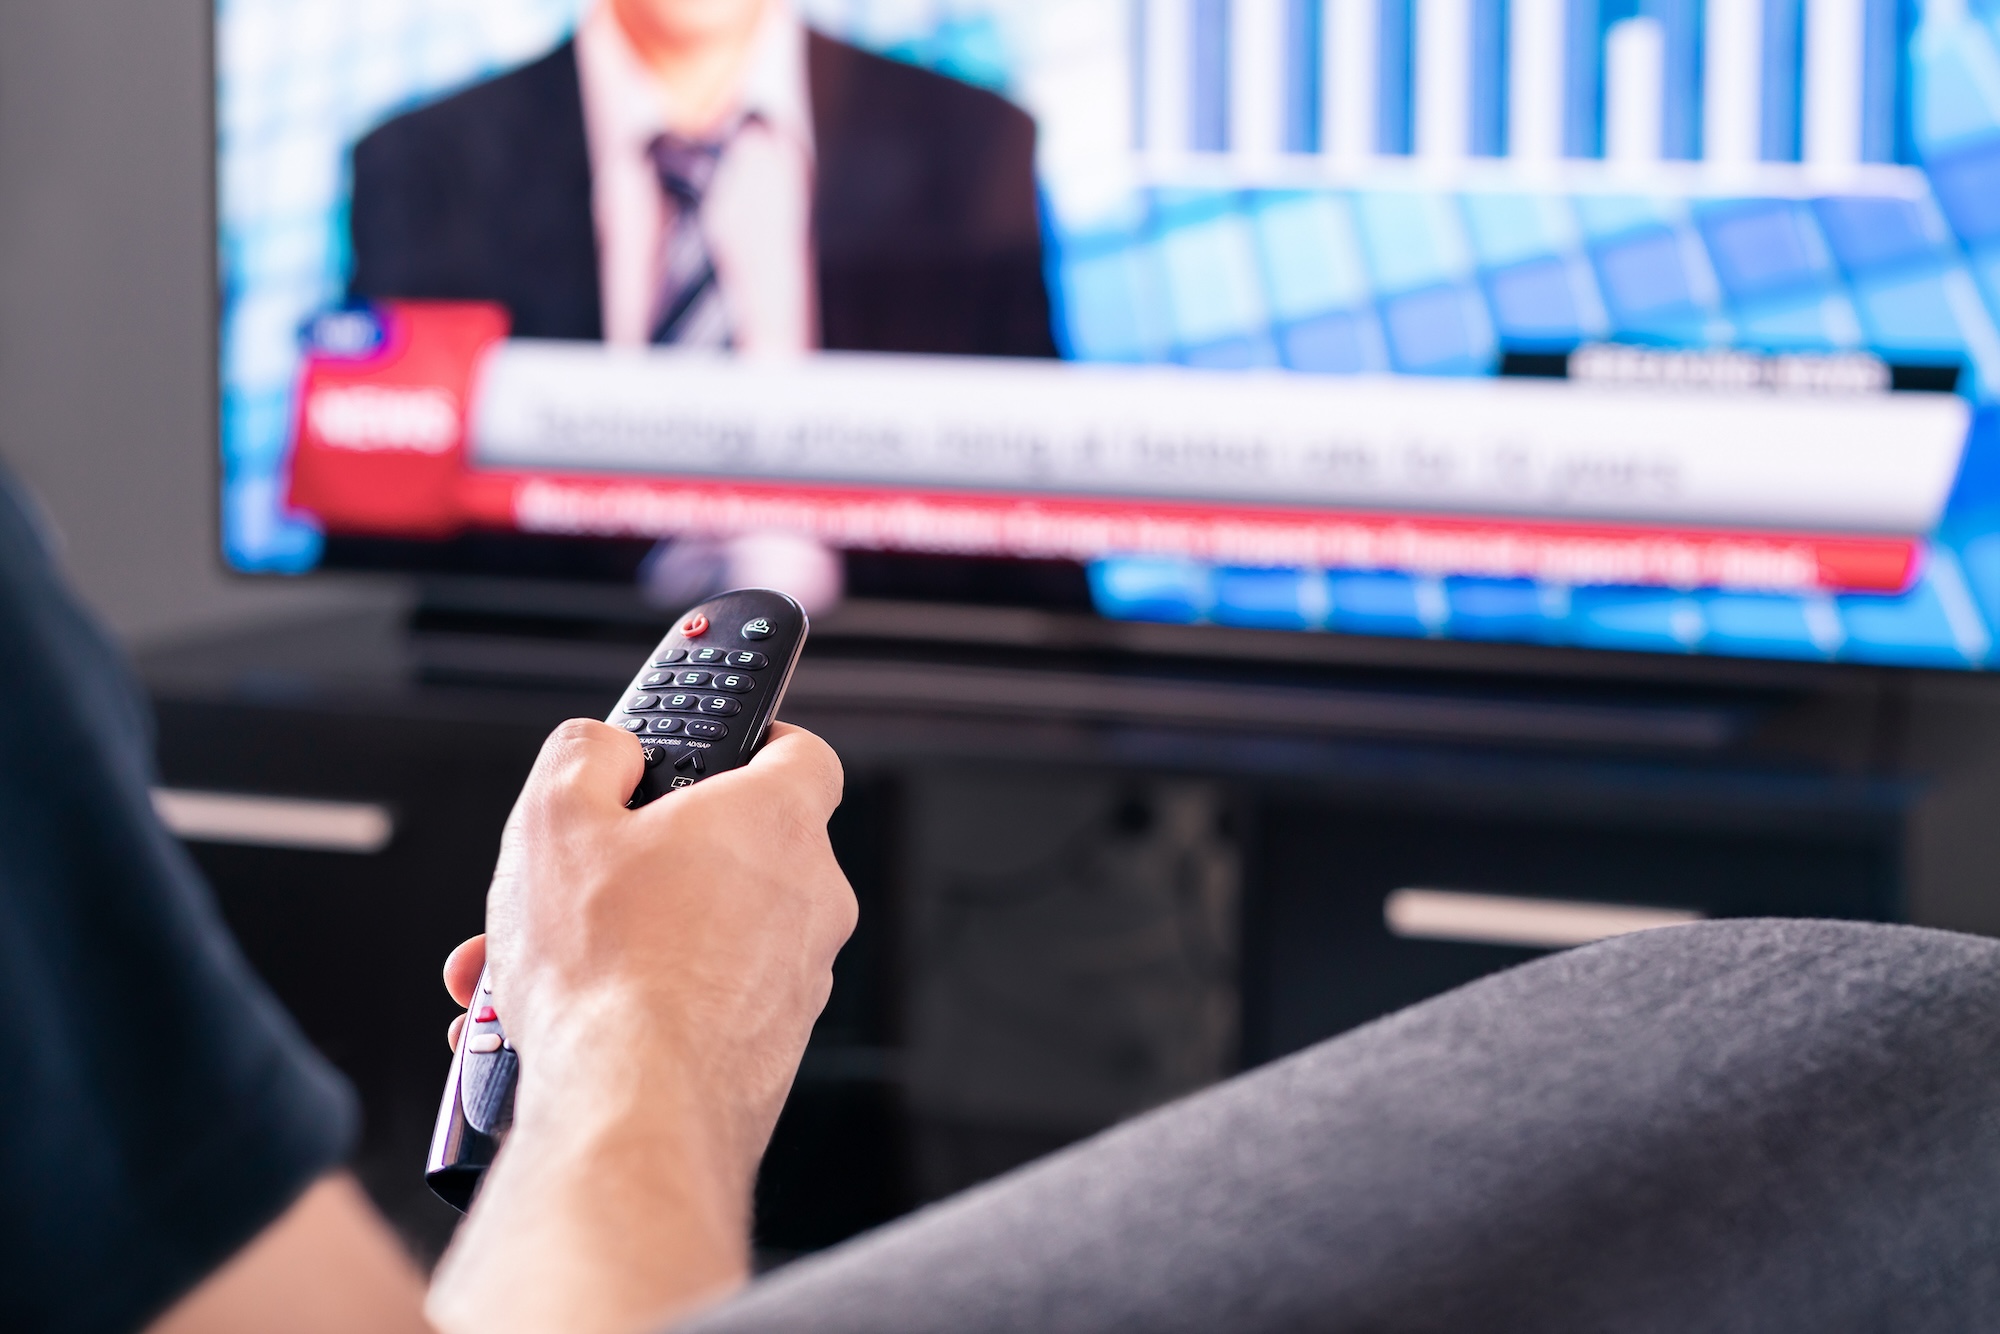 A person is sitting on a couch, holding a remote control in their right hand, and pointing it at a television displaying a news broadcast with a blurred image of an anchor and scrolling text at the bottom.